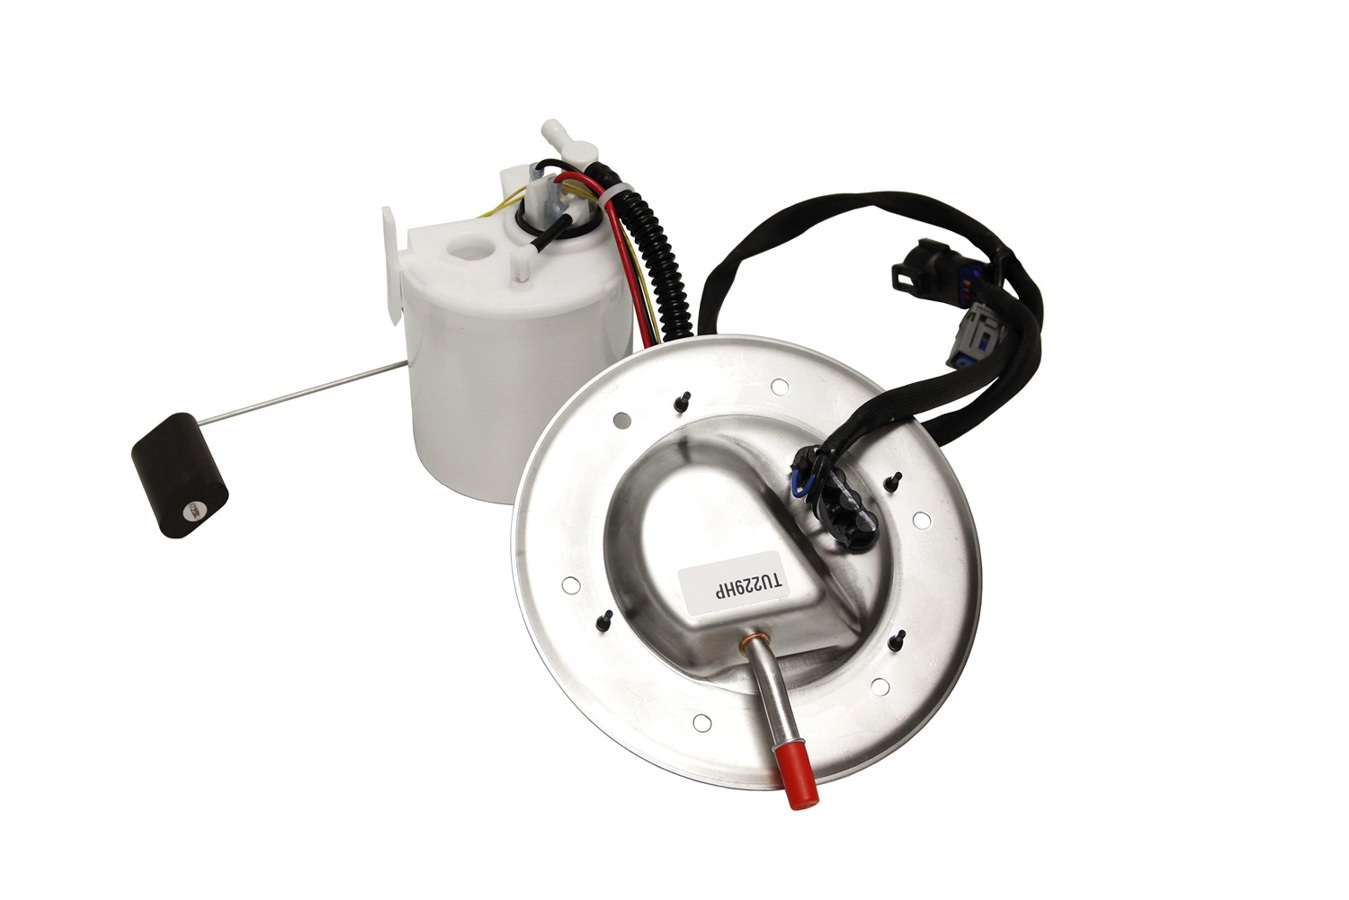 BBK Performance 1862 Fuel Pump, Electric, In-Tank, 300 lph, Install Kit, Gas, Ford Mustang 1999-2000, Kit